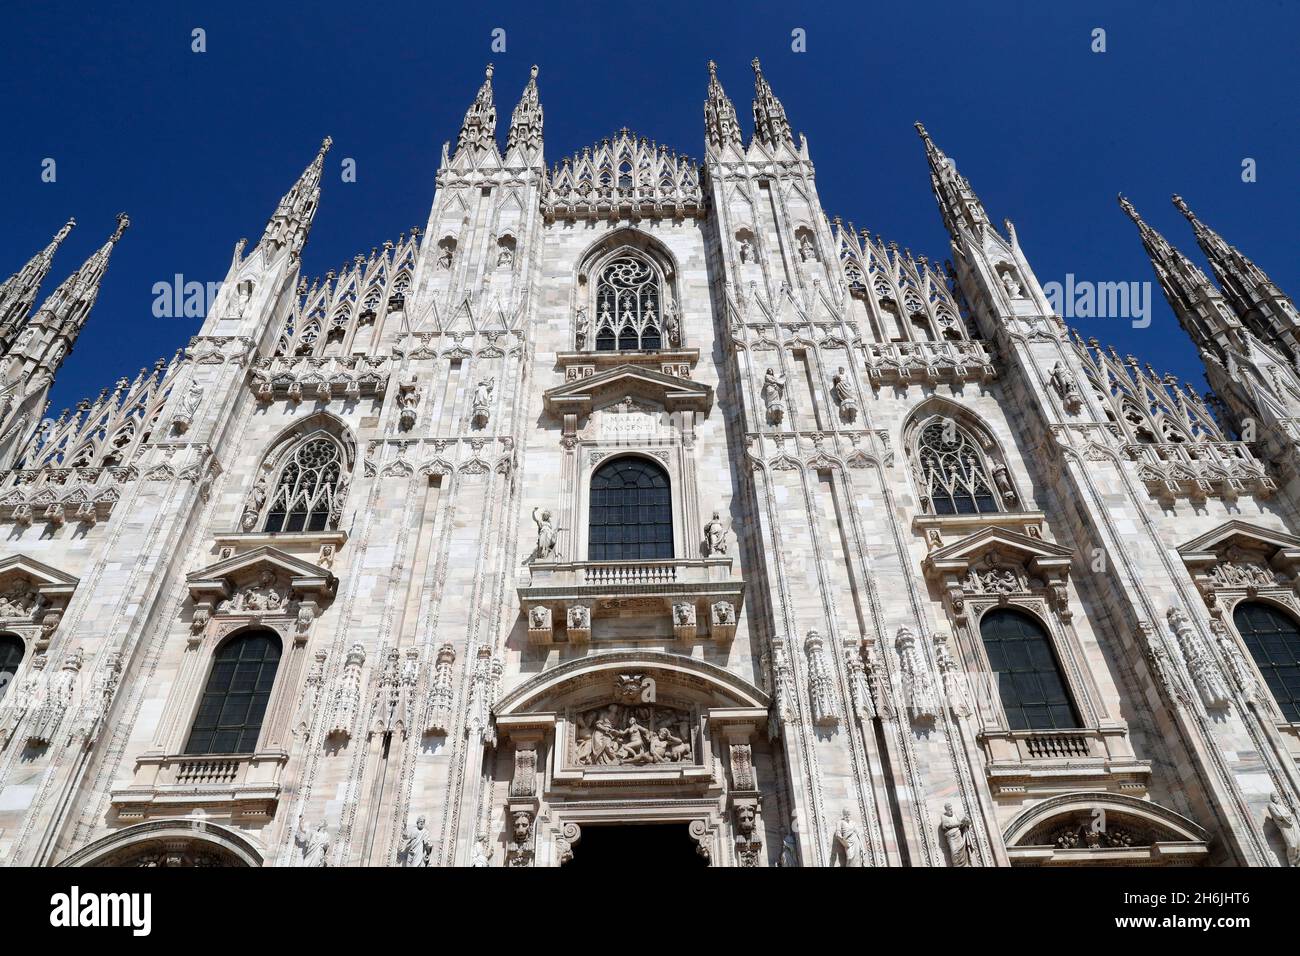 The west facade of the Duomo, the Gothic style cathedral dedicated to St. Mary, Milan, Lombardy, Italy, Europe Stock Photo